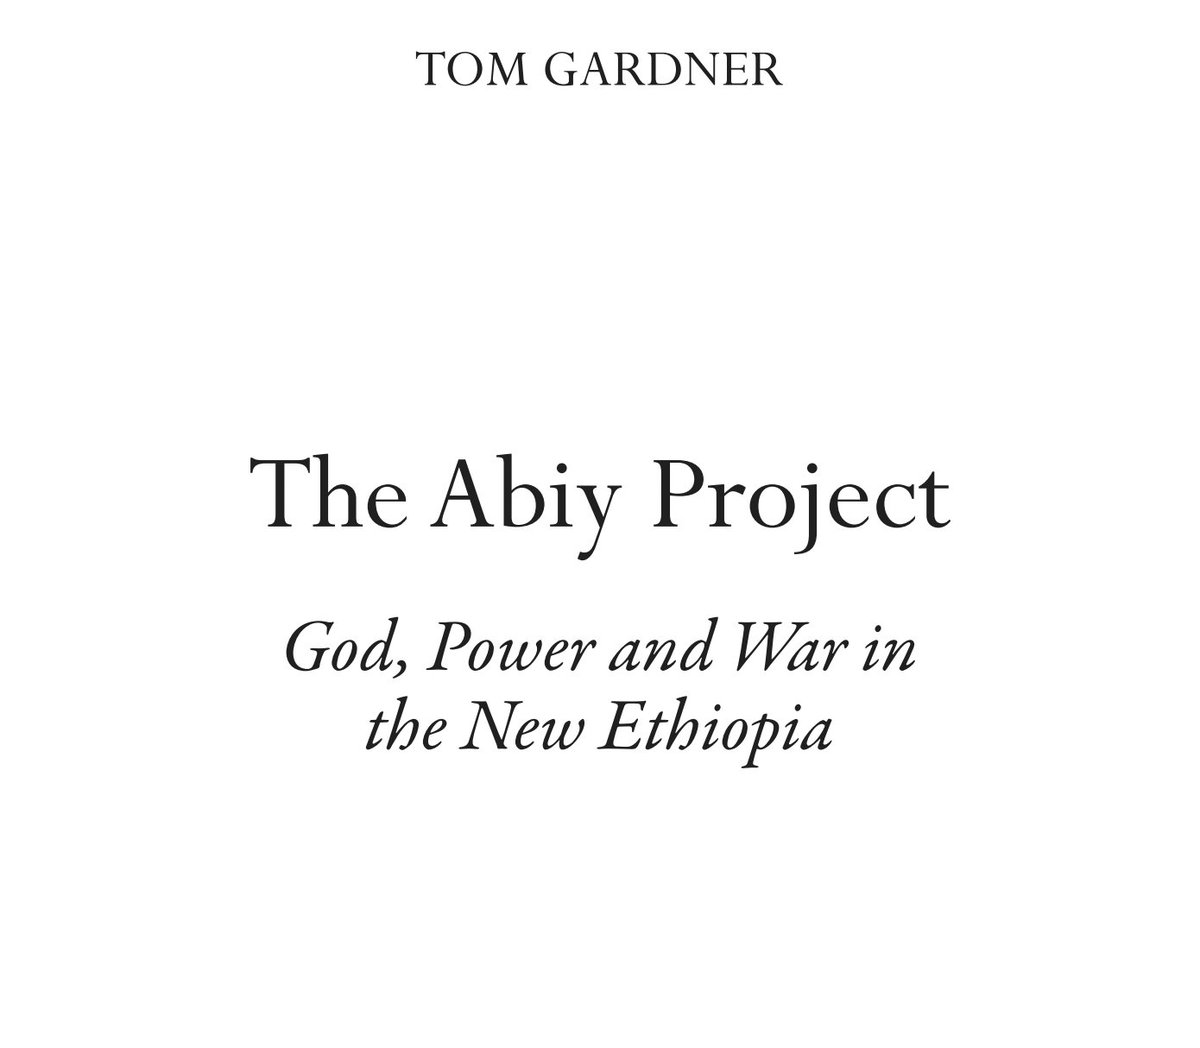 Congrats to @TomGardner18 for this one, & thanks to @HurstPublishers for sending me an advanced copy. It's publishing in June: hurstpublishers.com/book/the-abiy-…